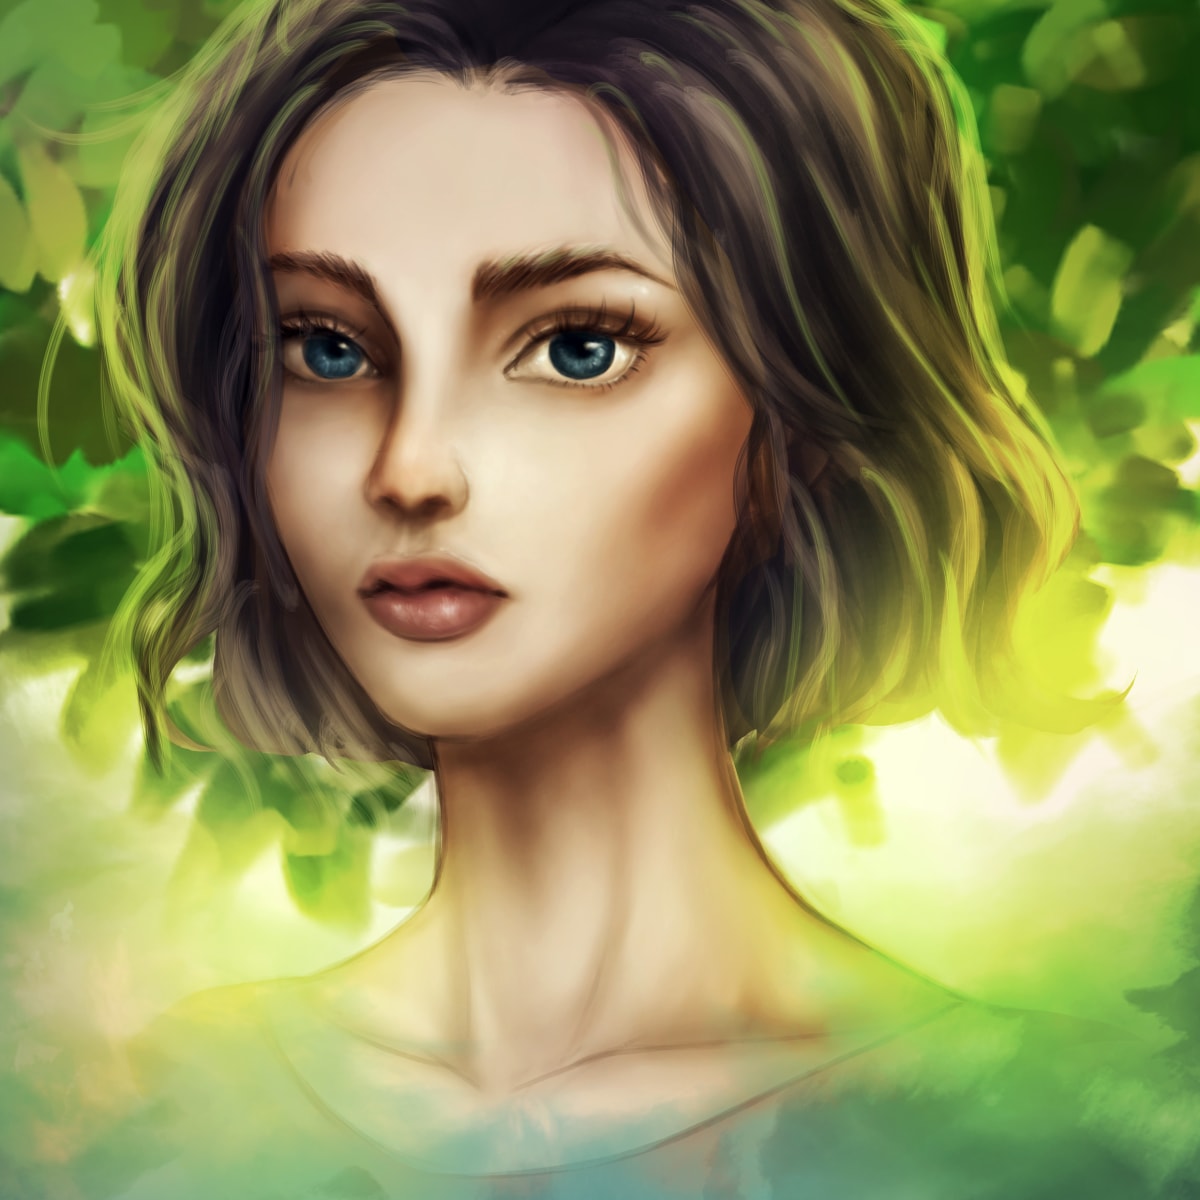 digital fantasy portraits with photoshop free download